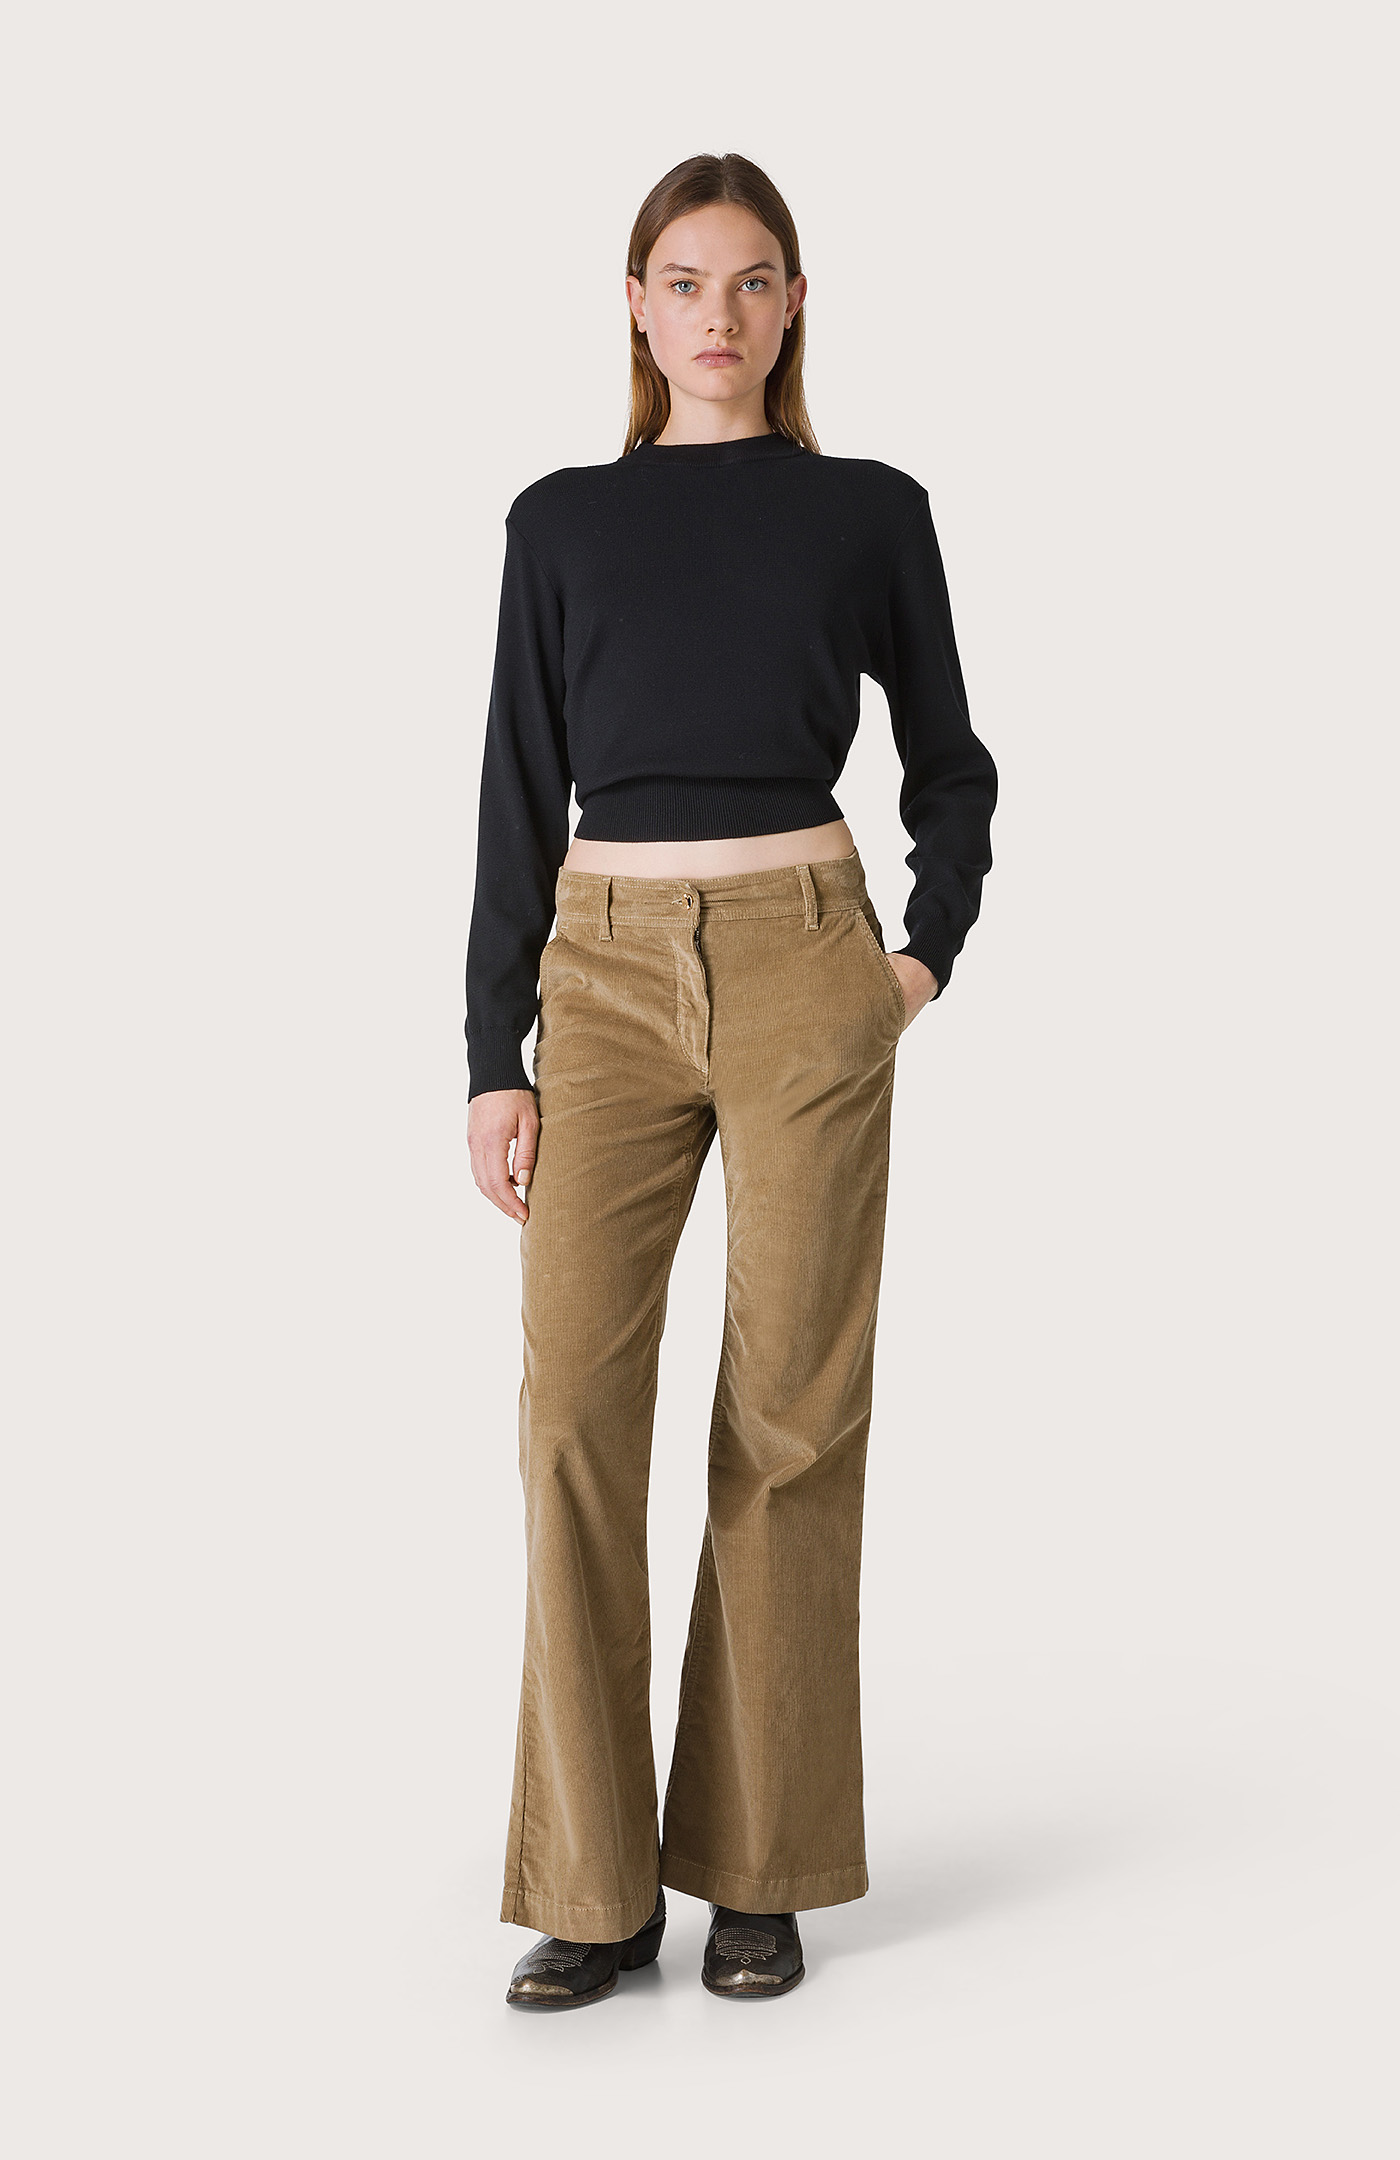 Buy Trousers Women Womens Pants Casual Work Plus Size Women Winter Pant  Casual Solid Color Trouser Keep Warm Plus Velvet Long Pants Solid Trousers  High Waist Pants for Women Dressy Online at